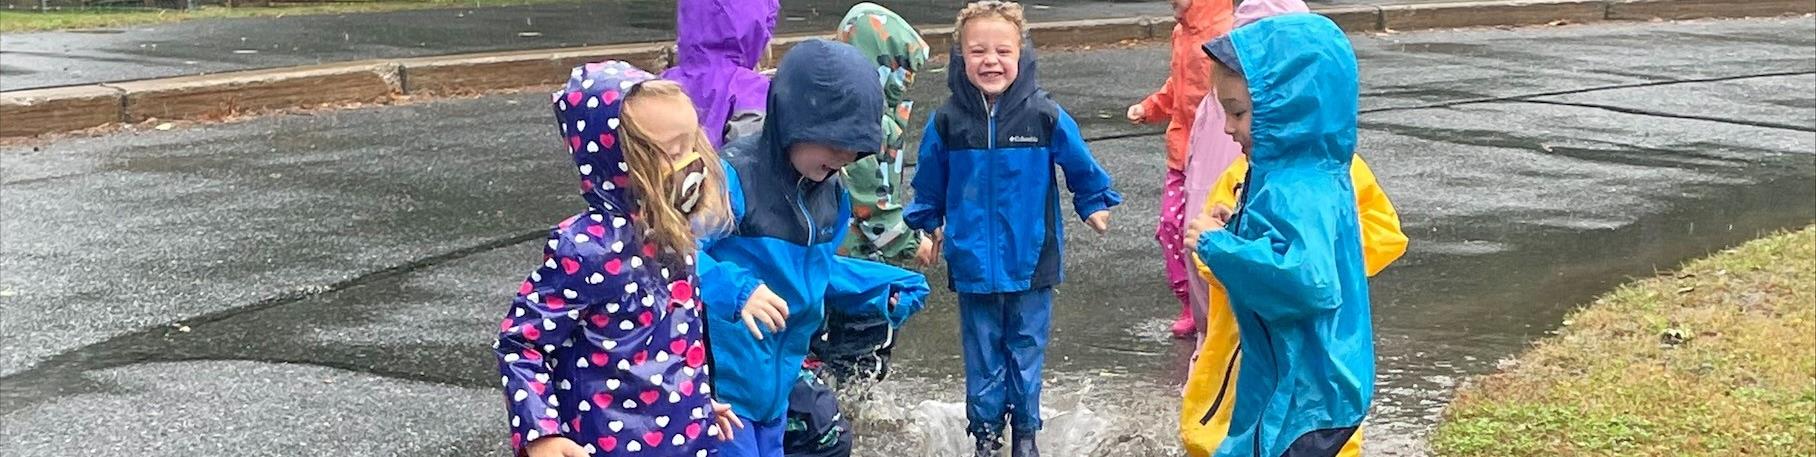 Preschool Students play in puddles